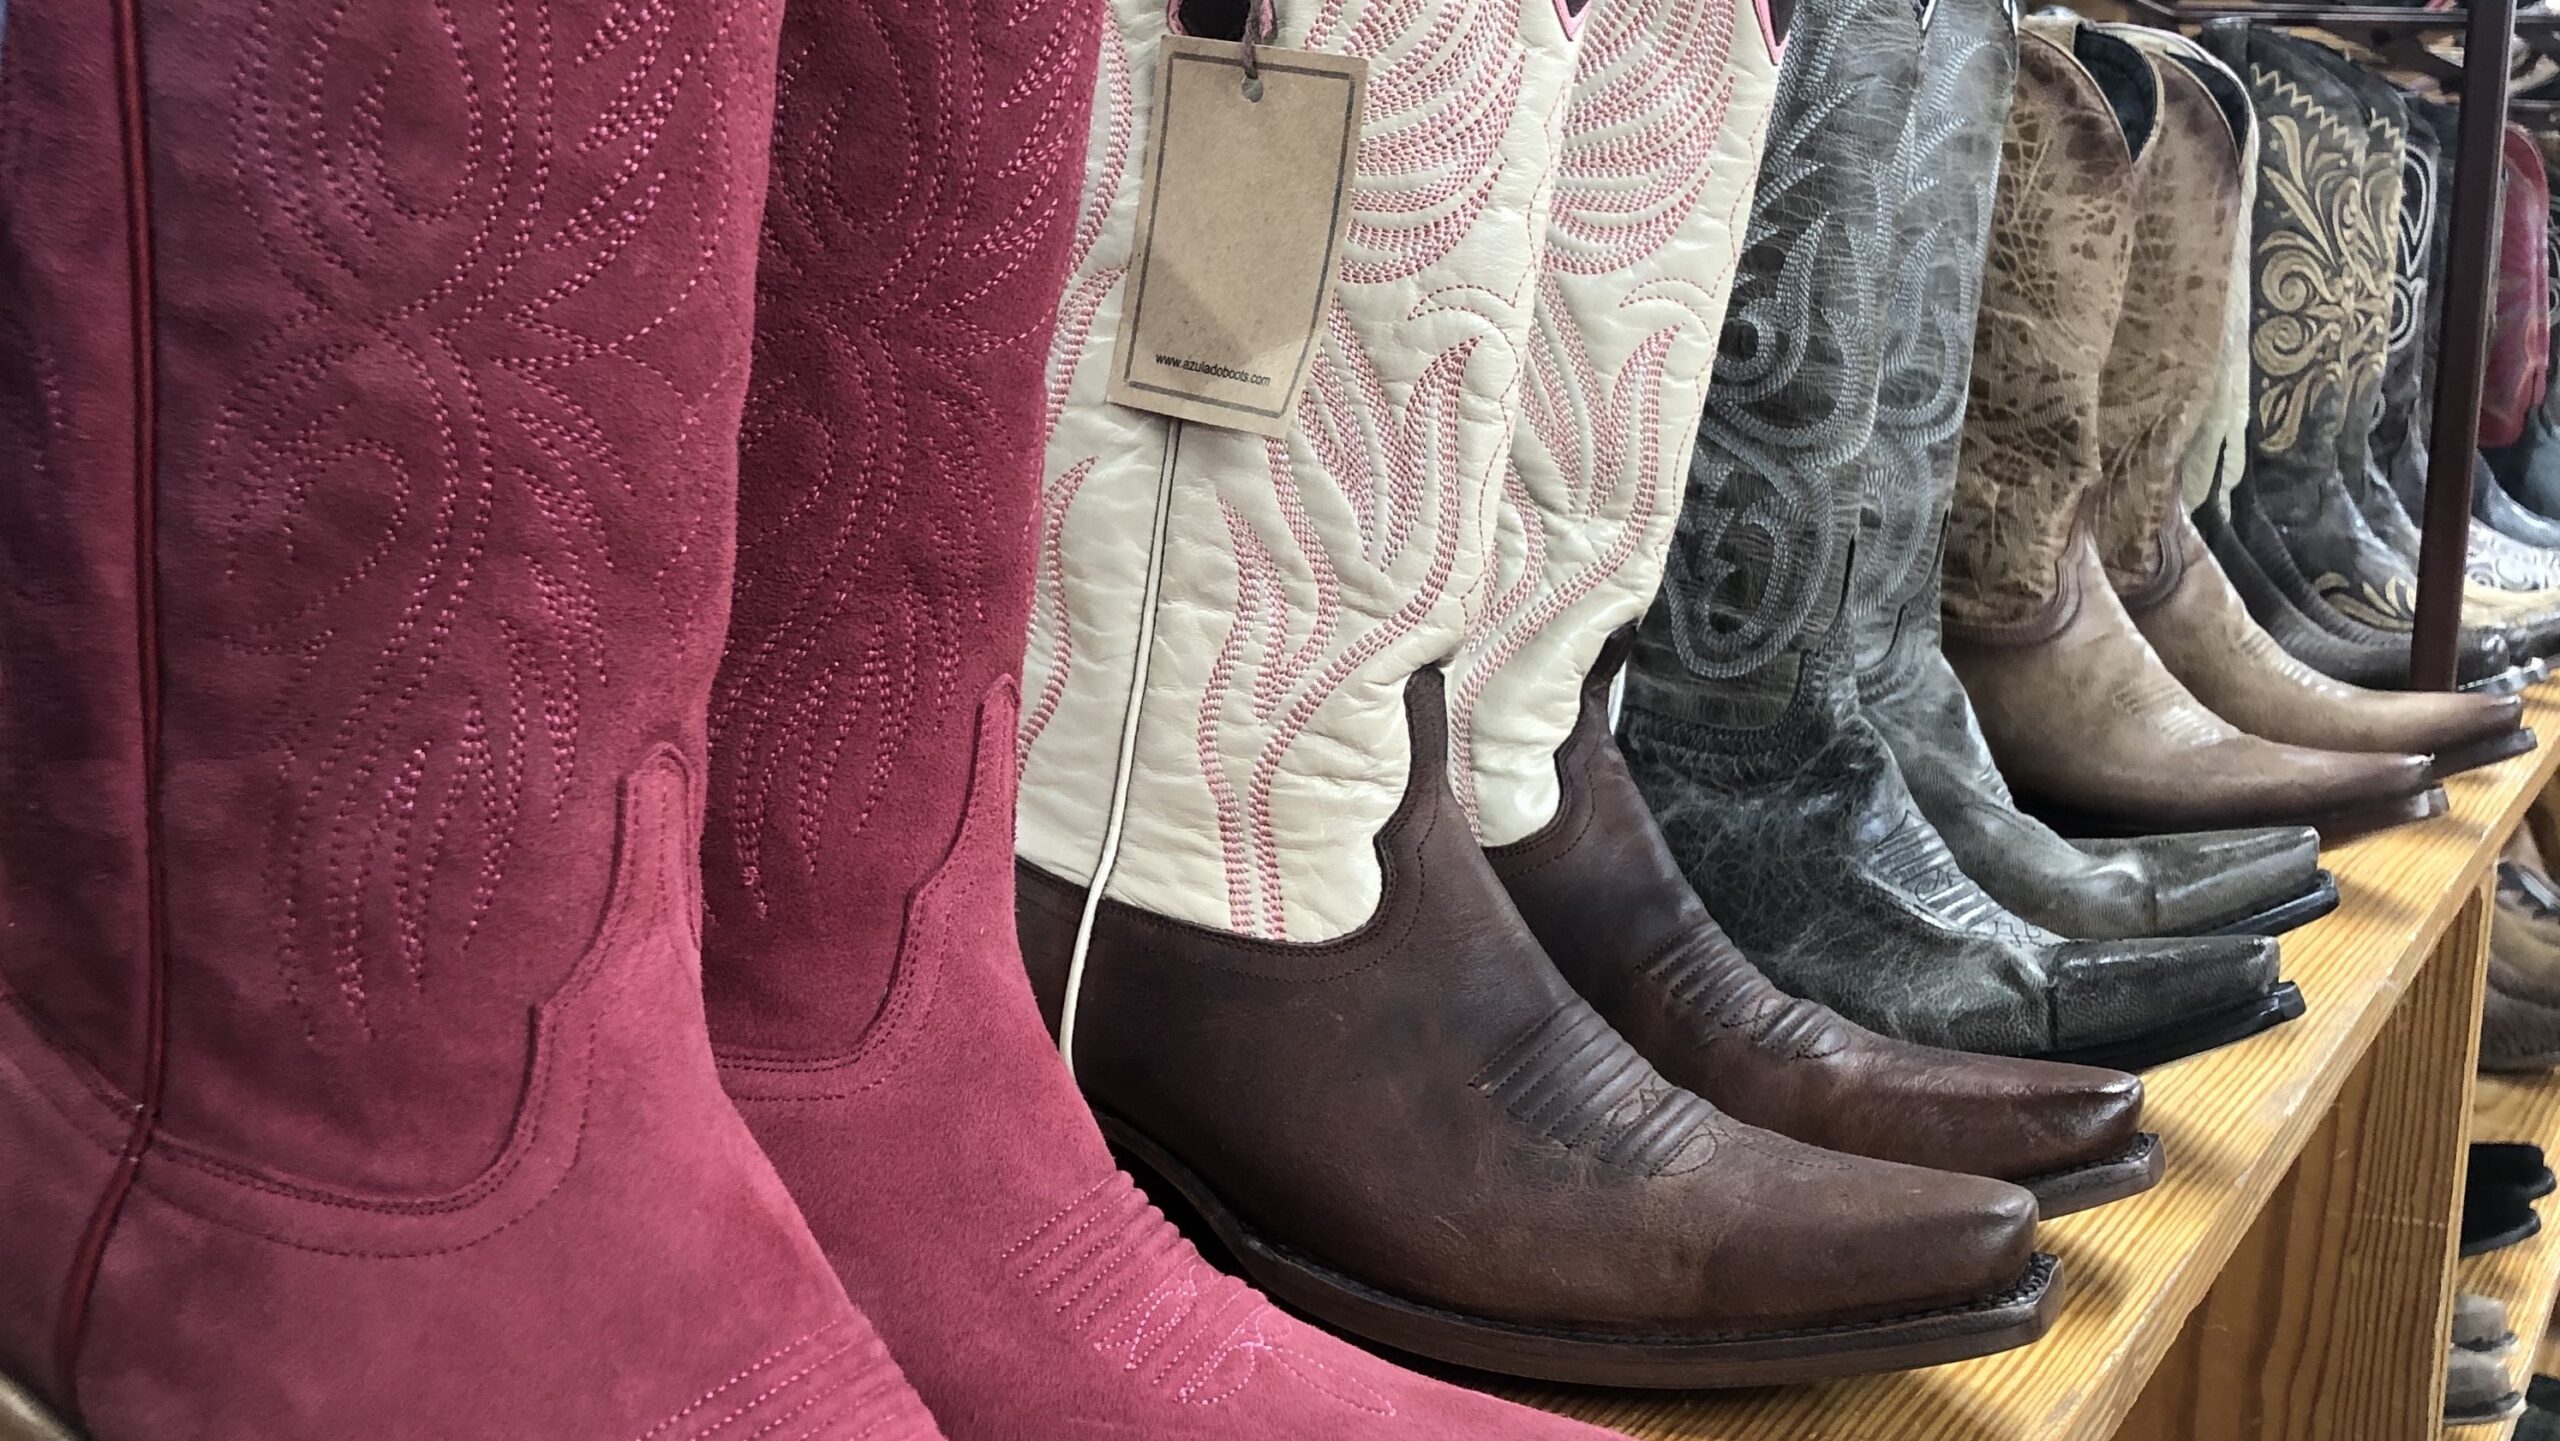 On the hunt for not-so-serious cowboy boots